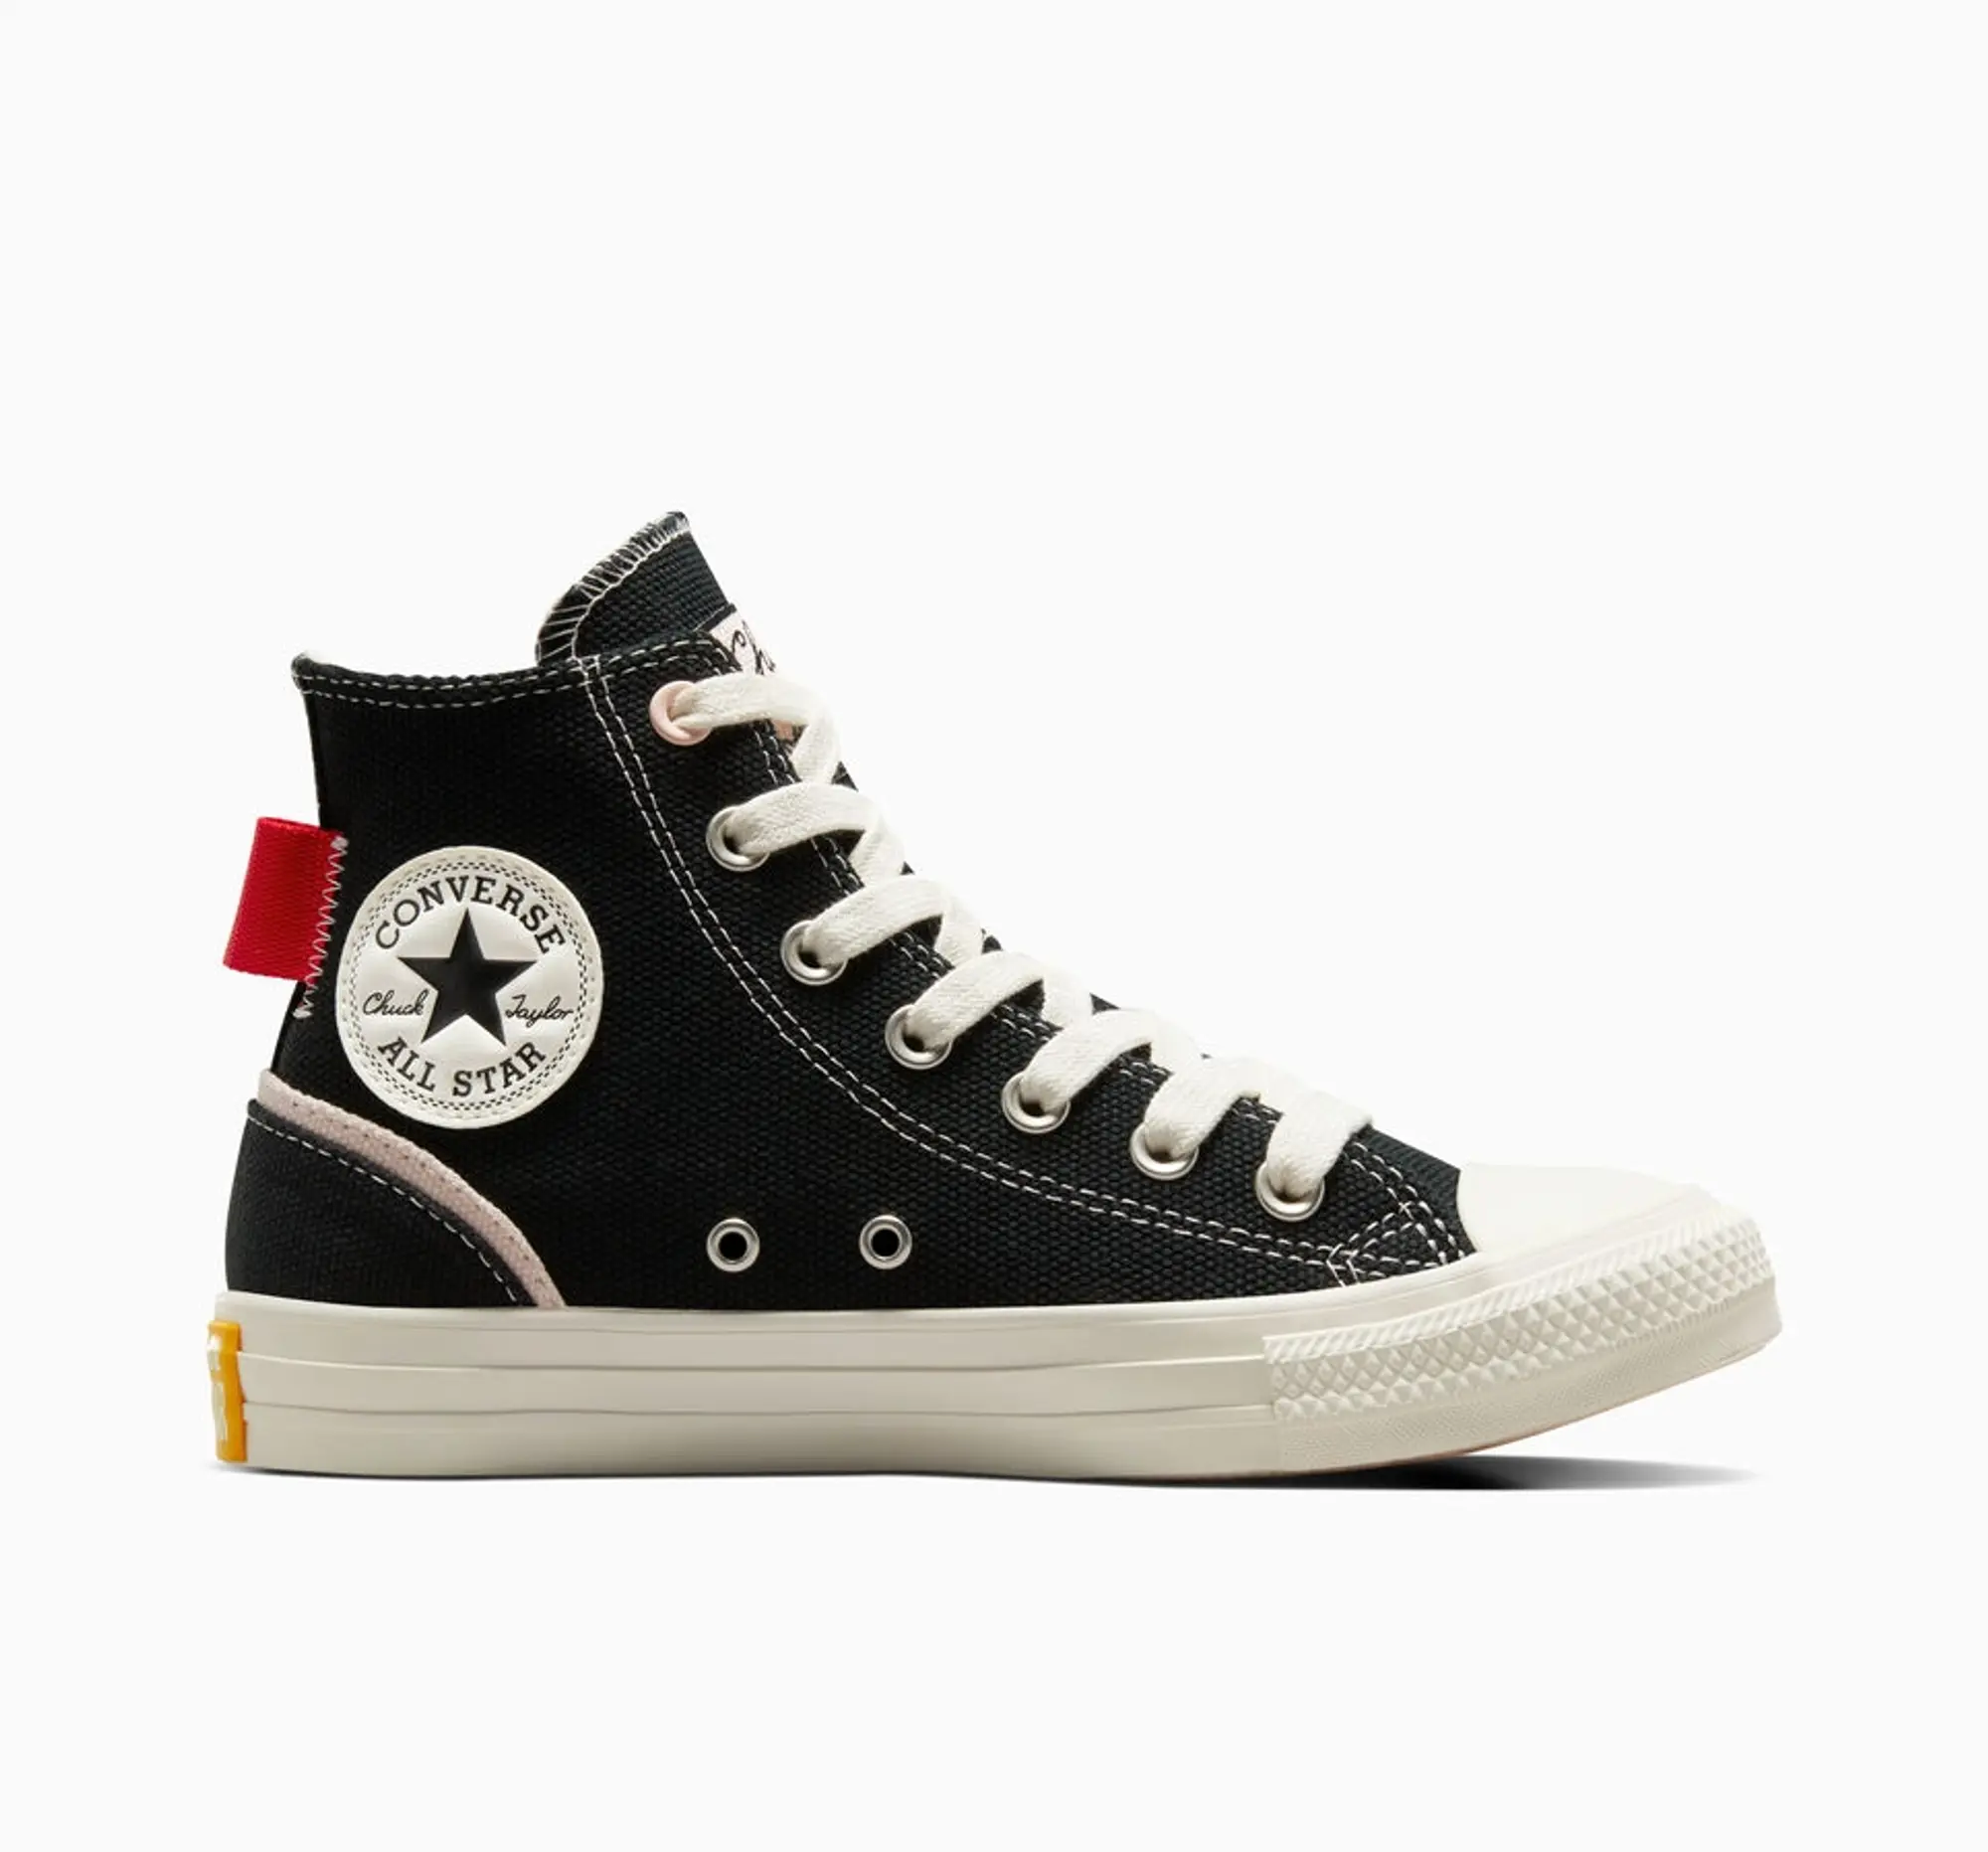 Converse All Star Hi City Utility Trainers In Black & White